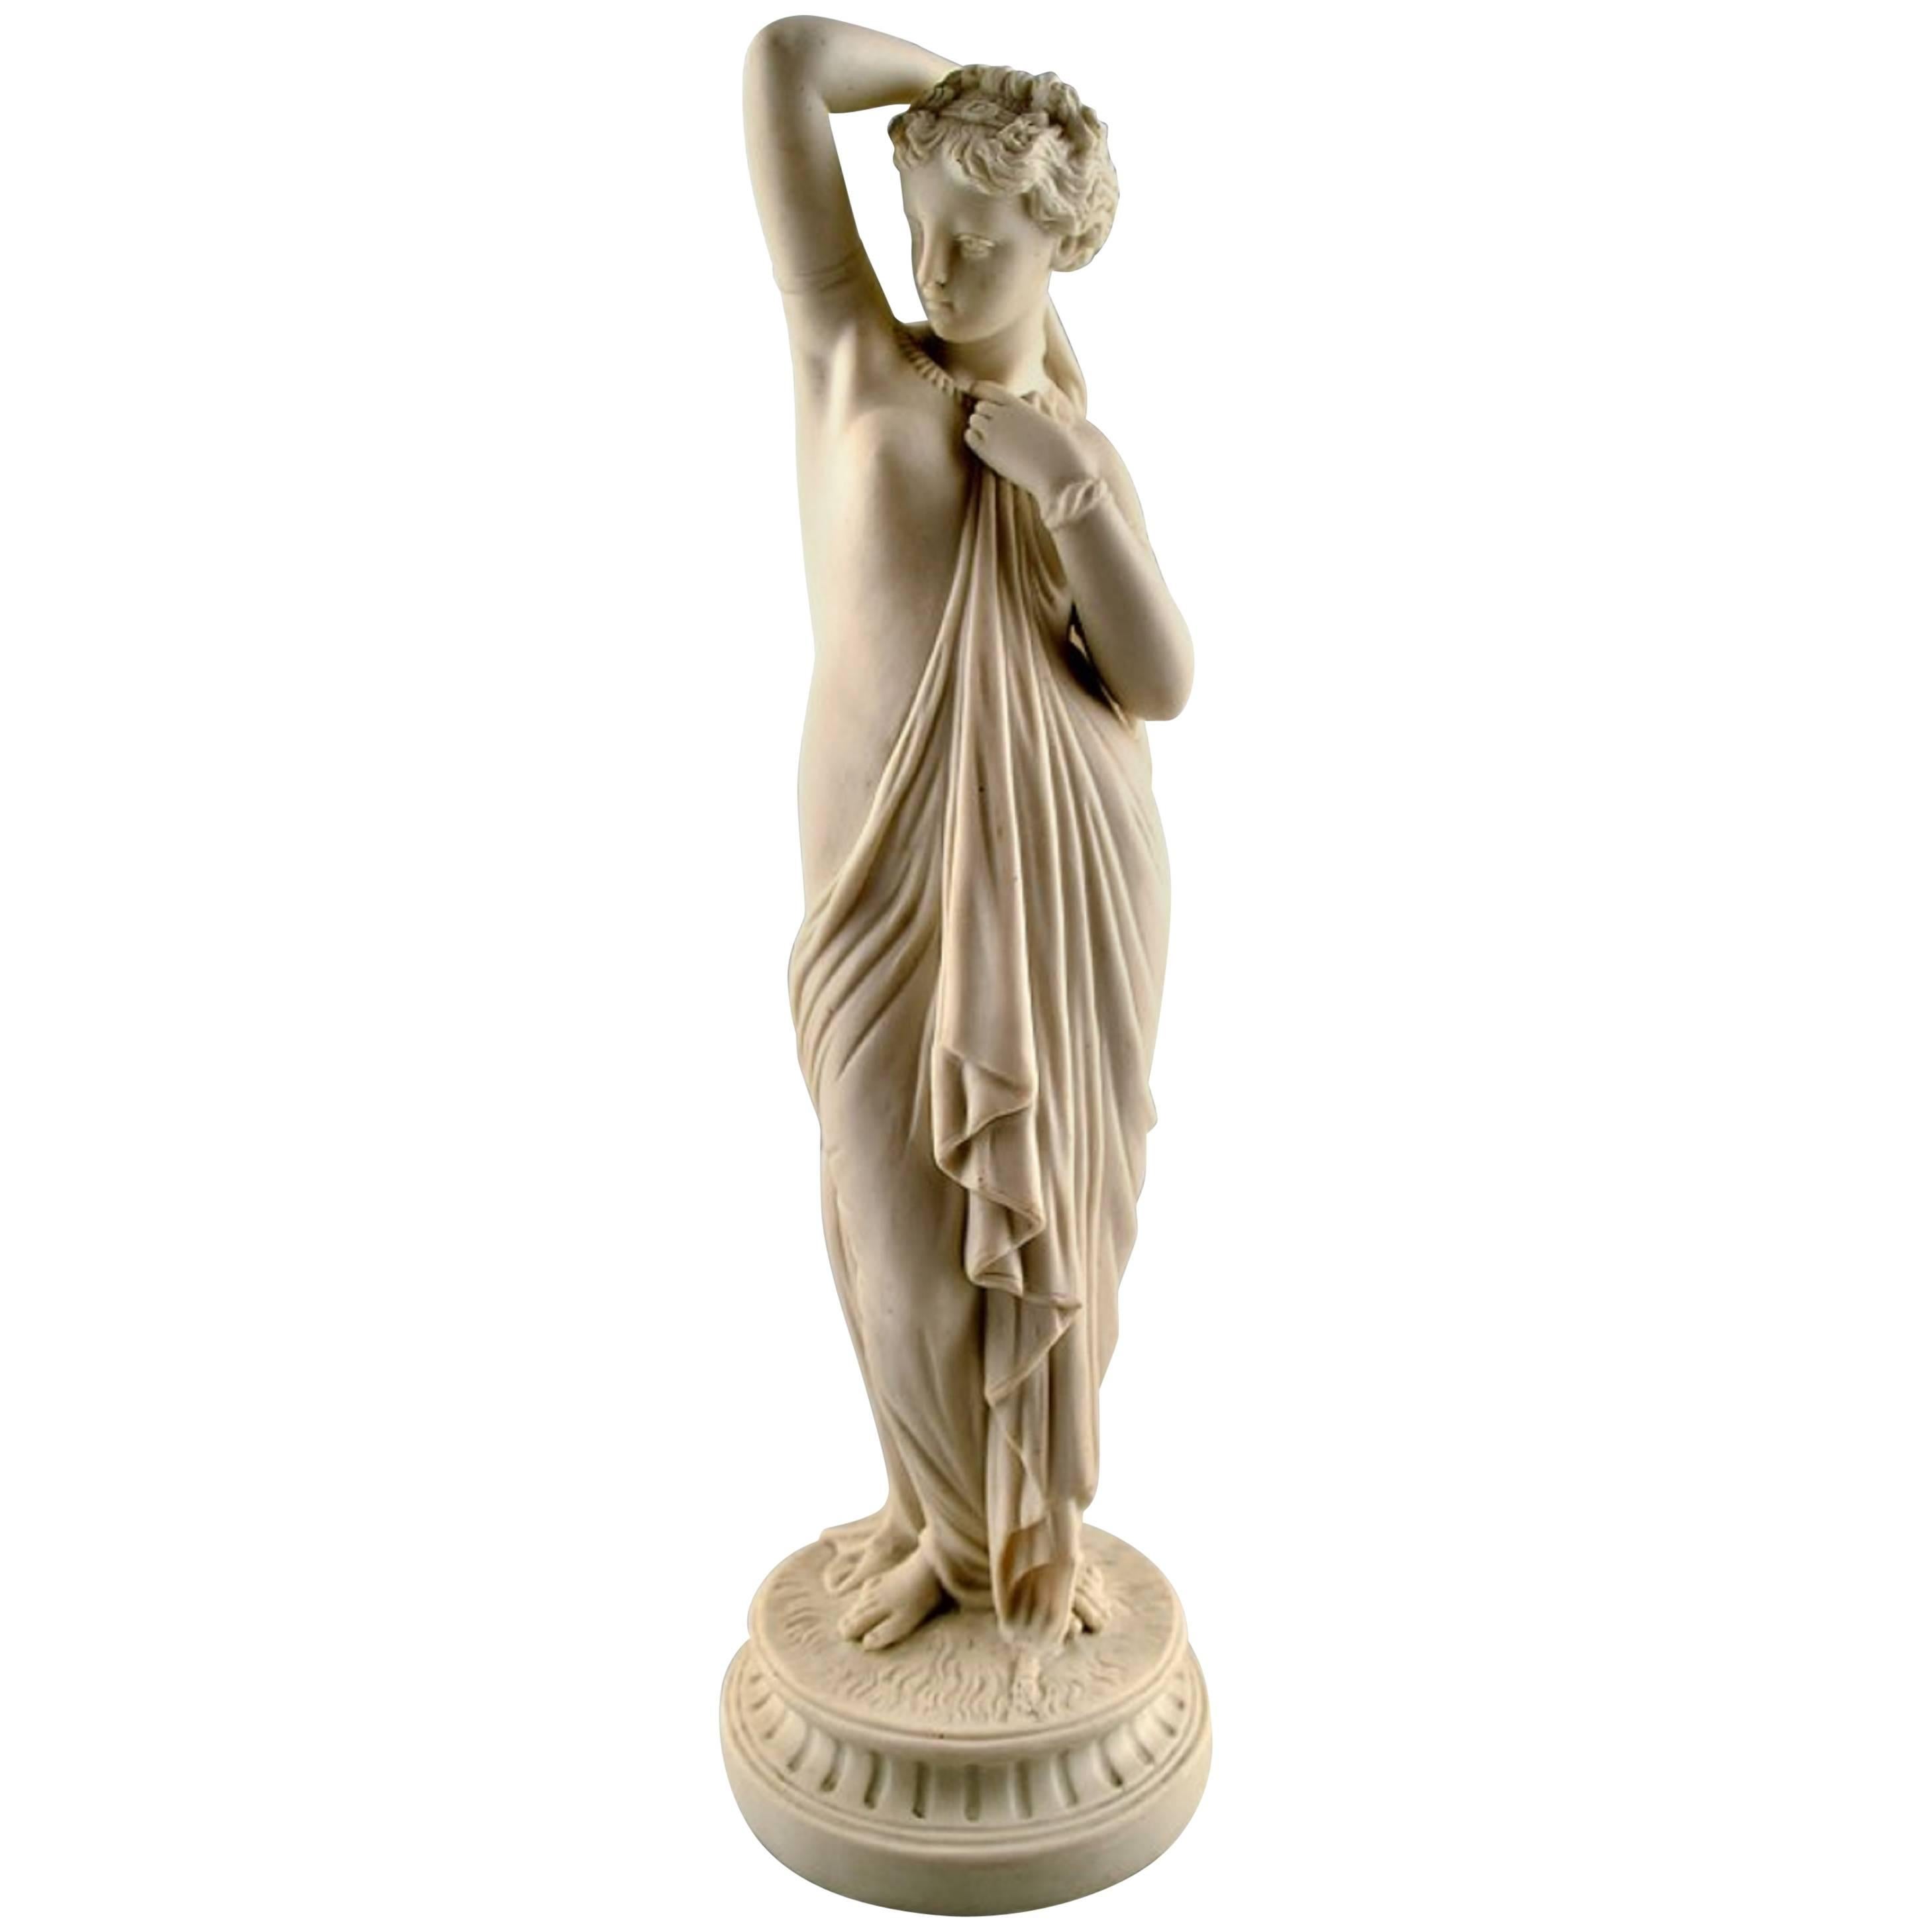 Antique Large Biscuit Figure of Semi-Nude Woman in Classical Style